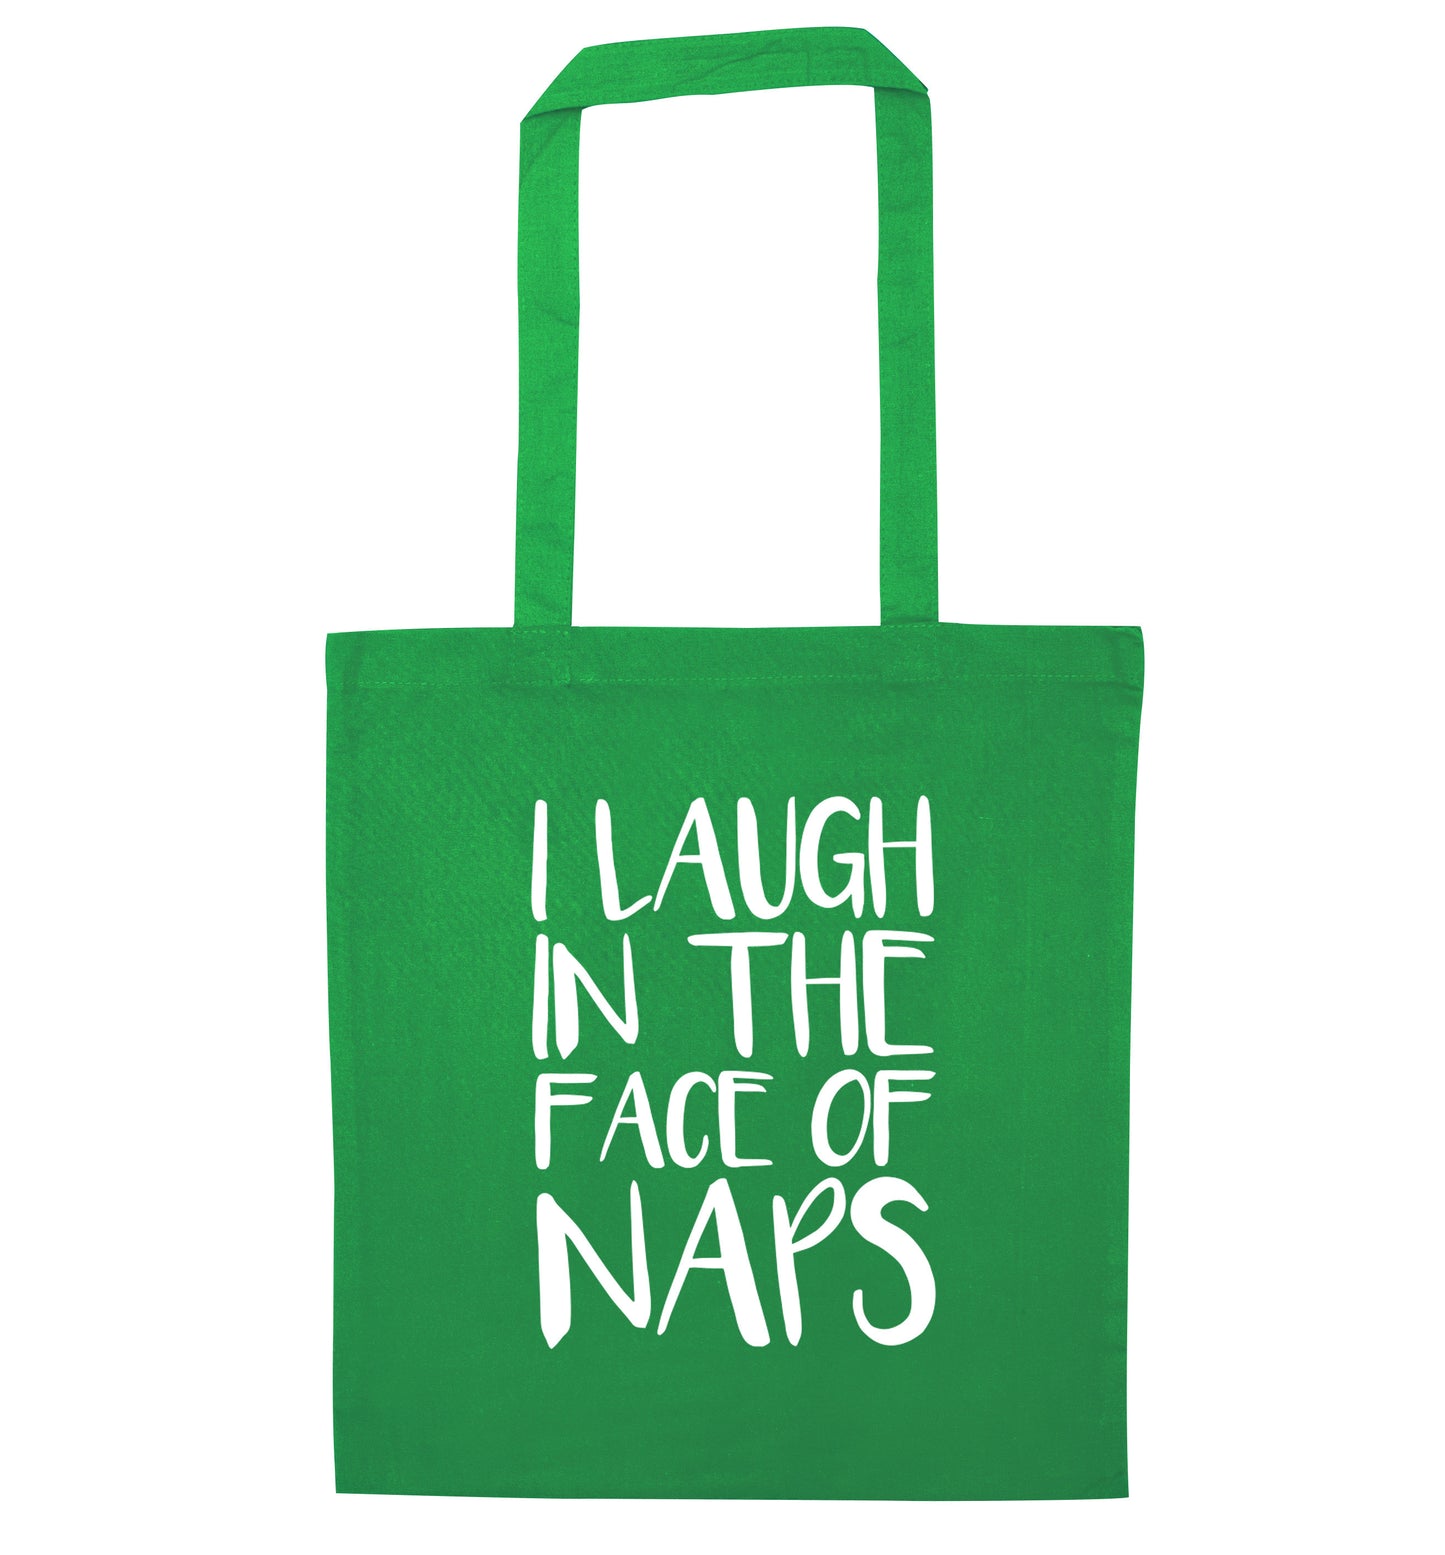 I laugh in the face of naps green tote bag